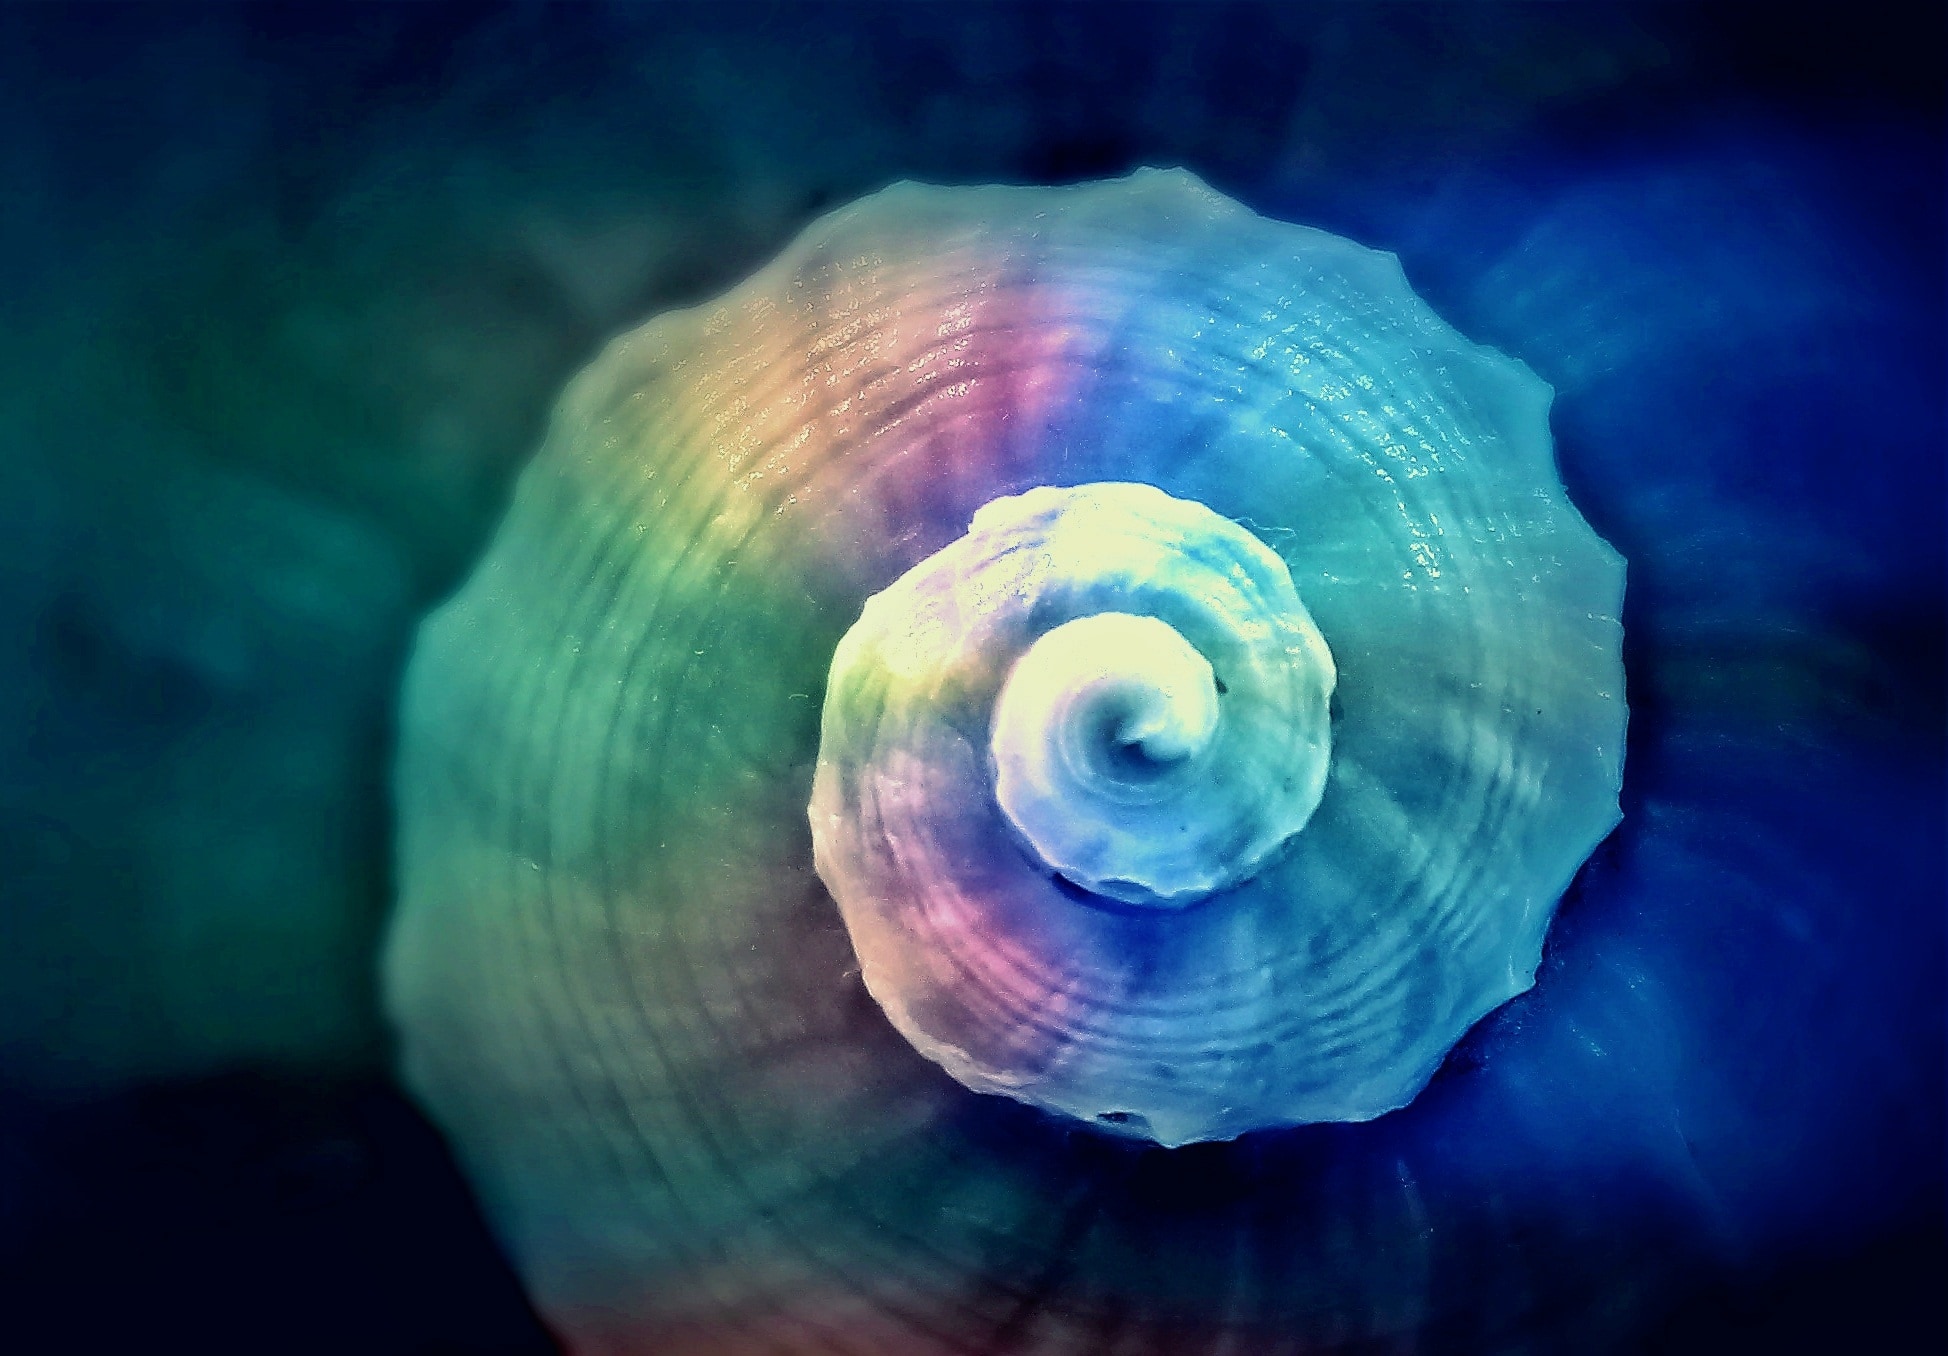 Snail, Snail Shell, Spiral, Shell, one animal, no people